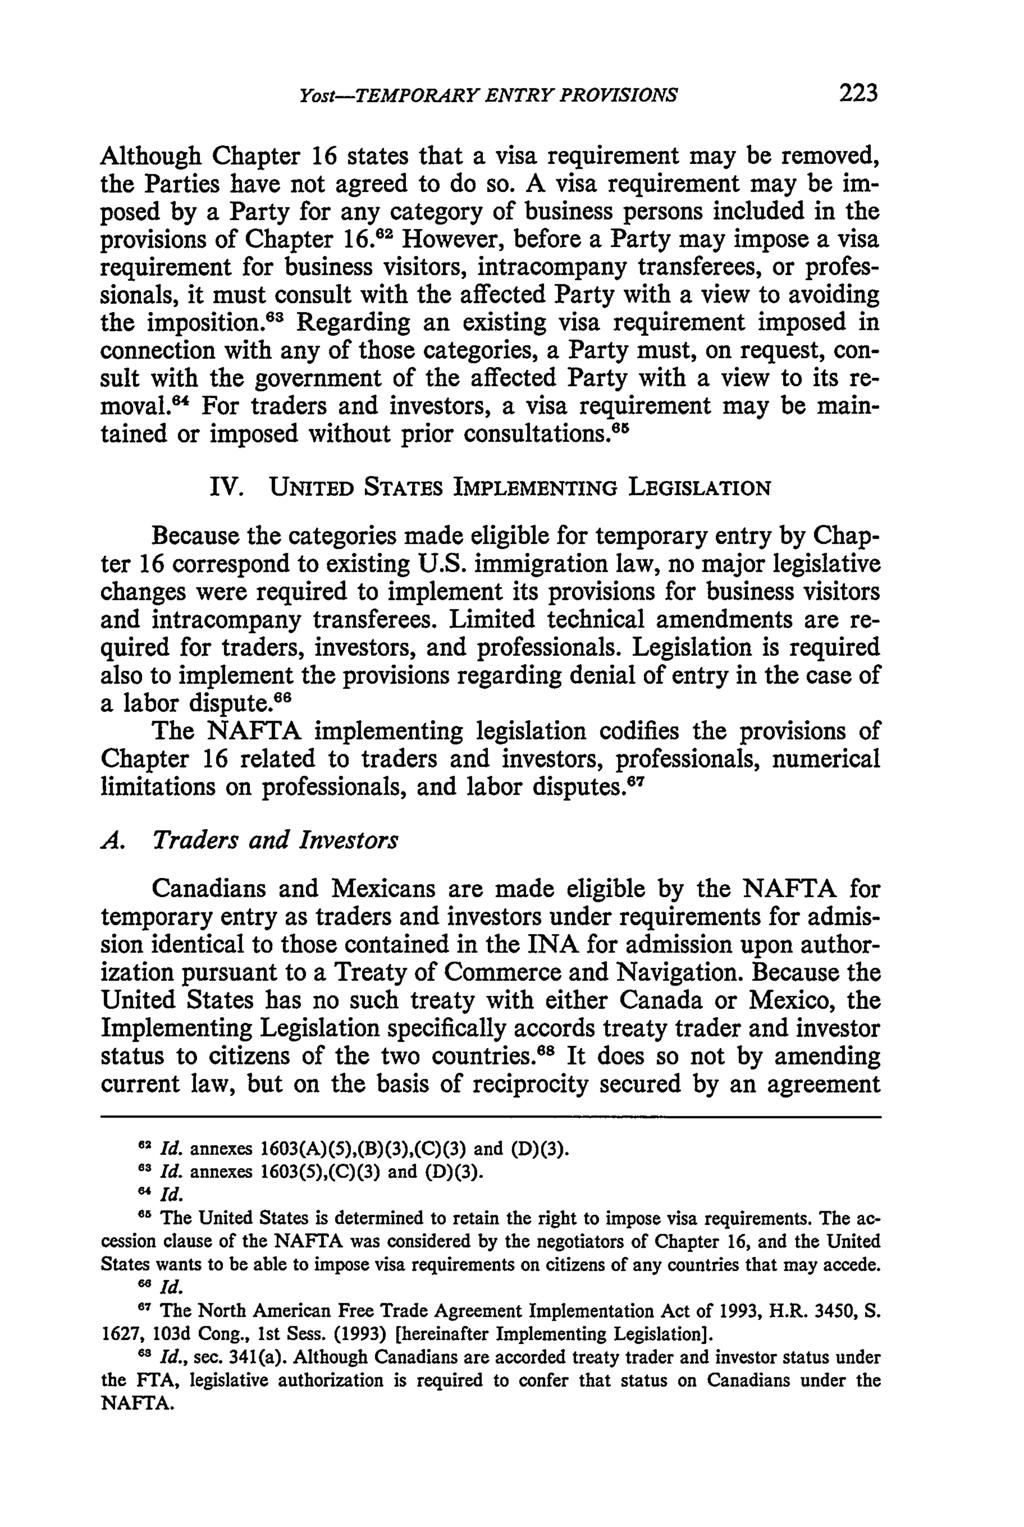 Yost: NAFTA--Temporary Entry Provisions--Immigration Dimensions Yost-TEMPORARY ENTRY PROVISIONS Although Chapter 16 states that a visa requirement may be removed, the Parties have not agreed to do so.